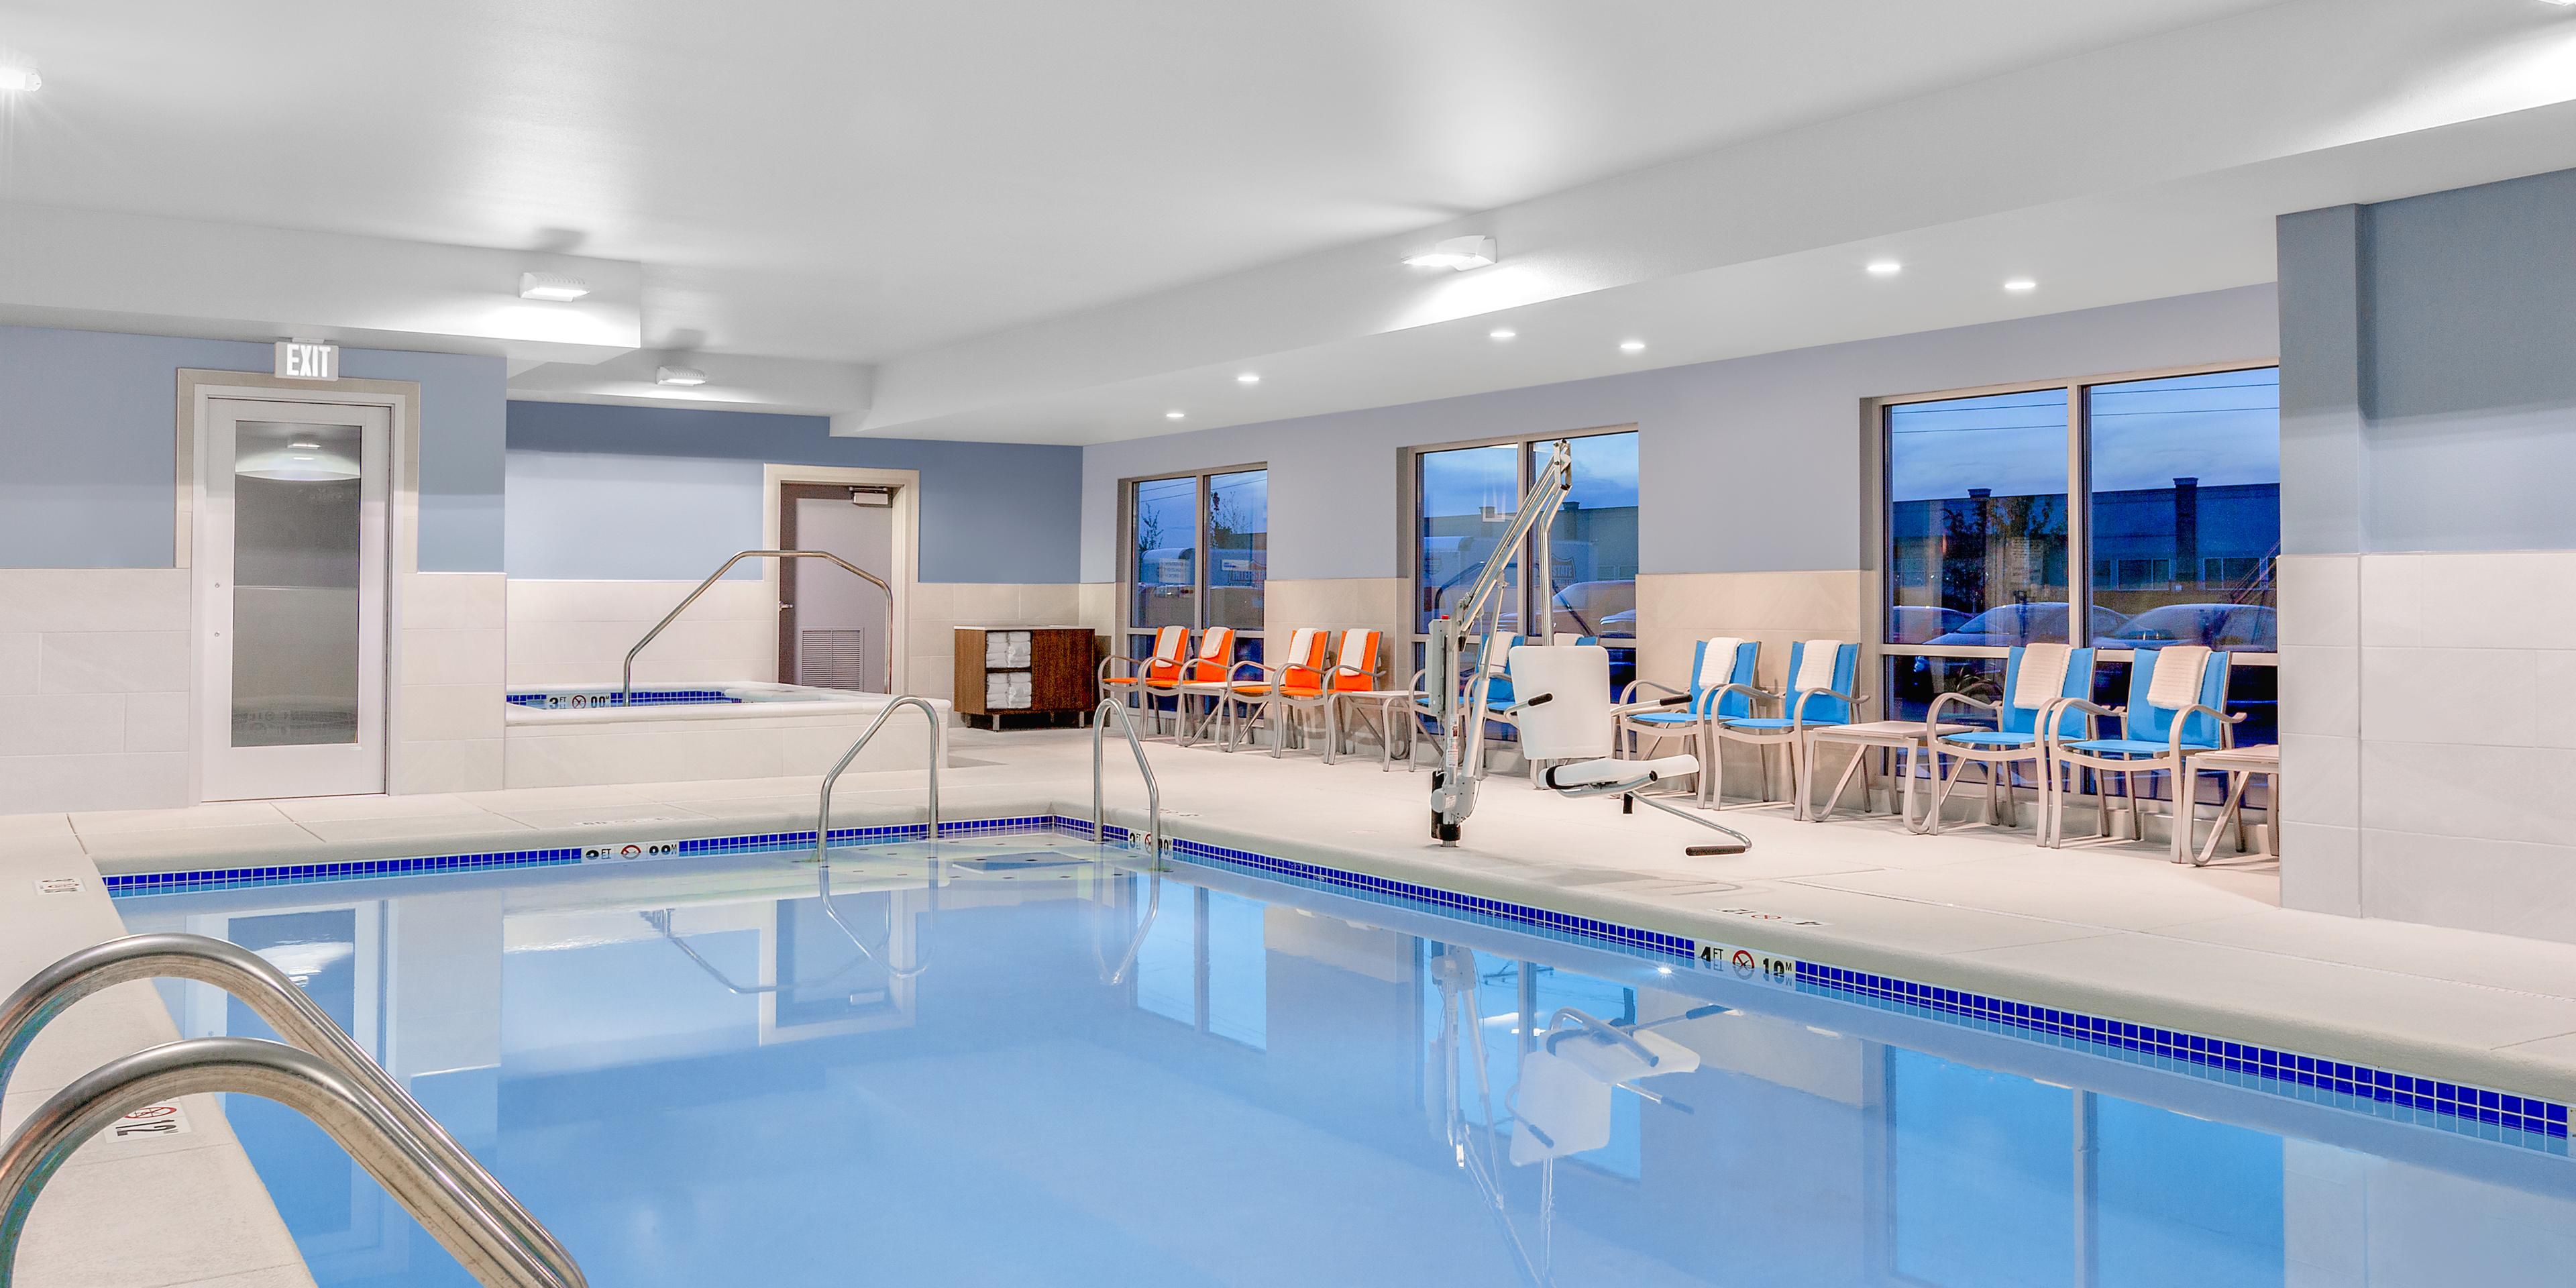 Make a splash in our indoor heated pool while parents can unwind in our heated indoor whirlpool. We’ve got breakfast covered too! With our complimentary Express Start Breakfast, we’ll help you kick start your day! 